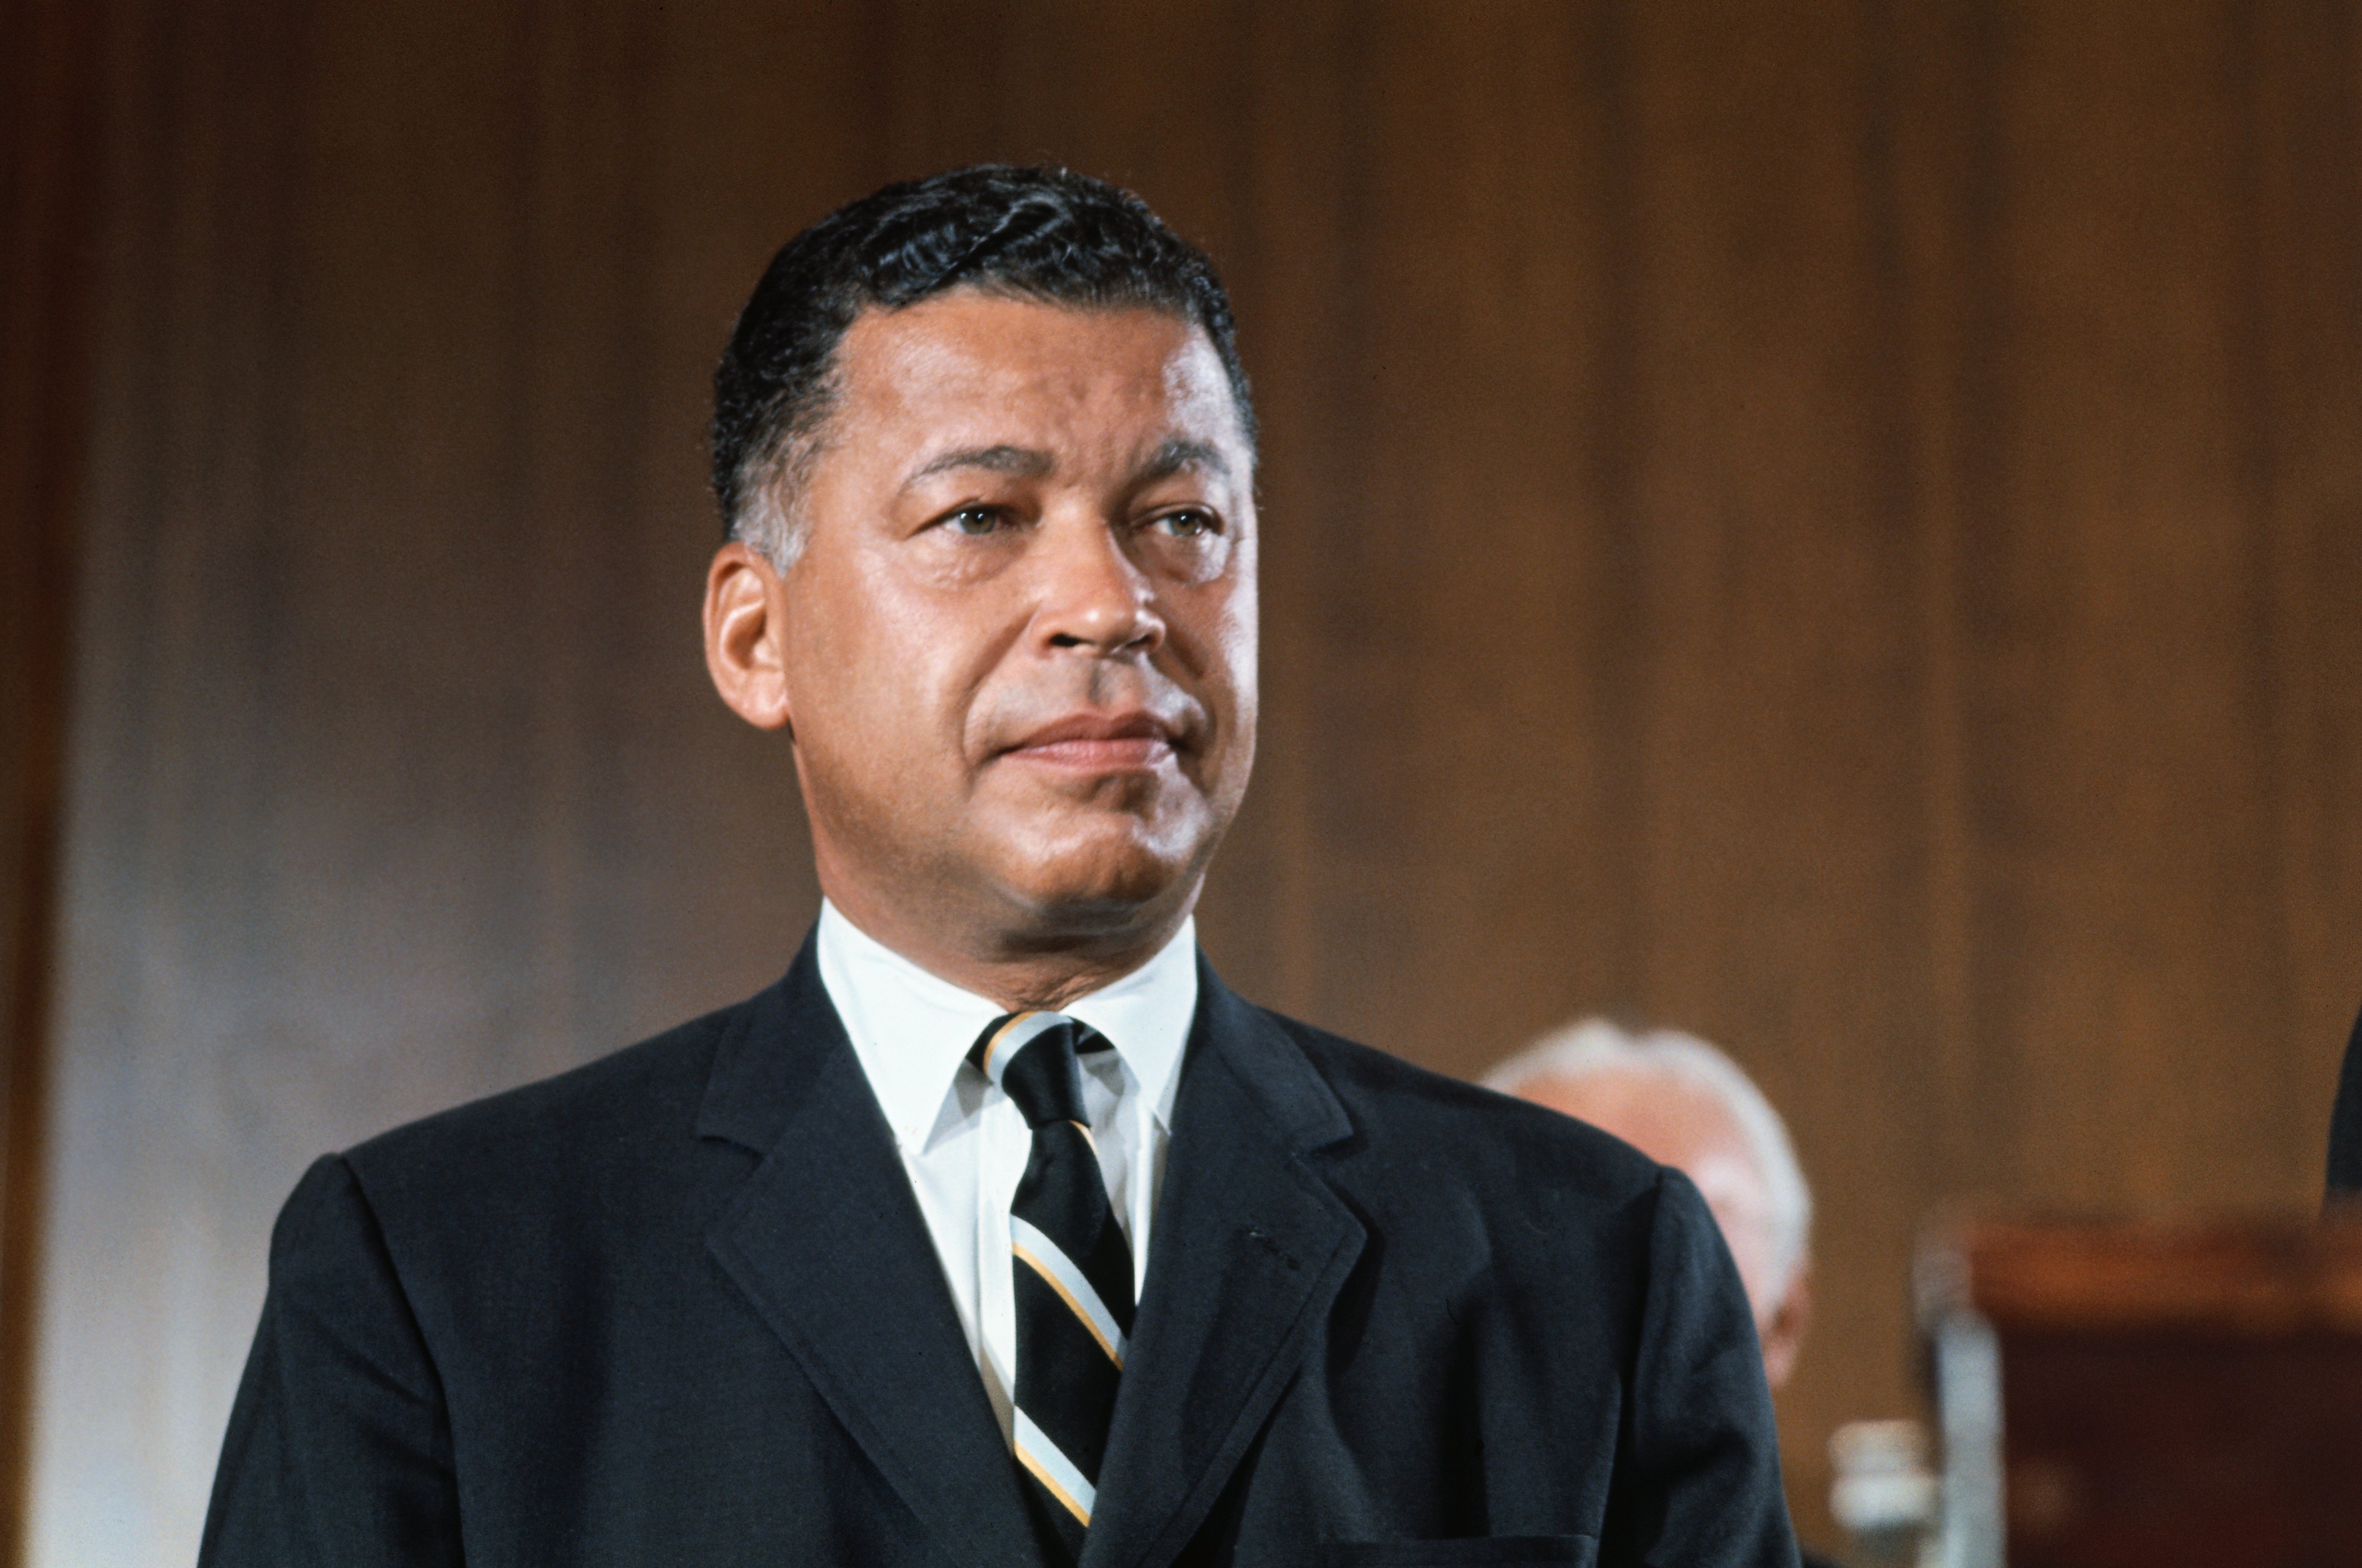 Senator Edward W. Brooke of Massachusetts closeup as a new "Rockefeller" for President committee is announced. | Source: Getty Images